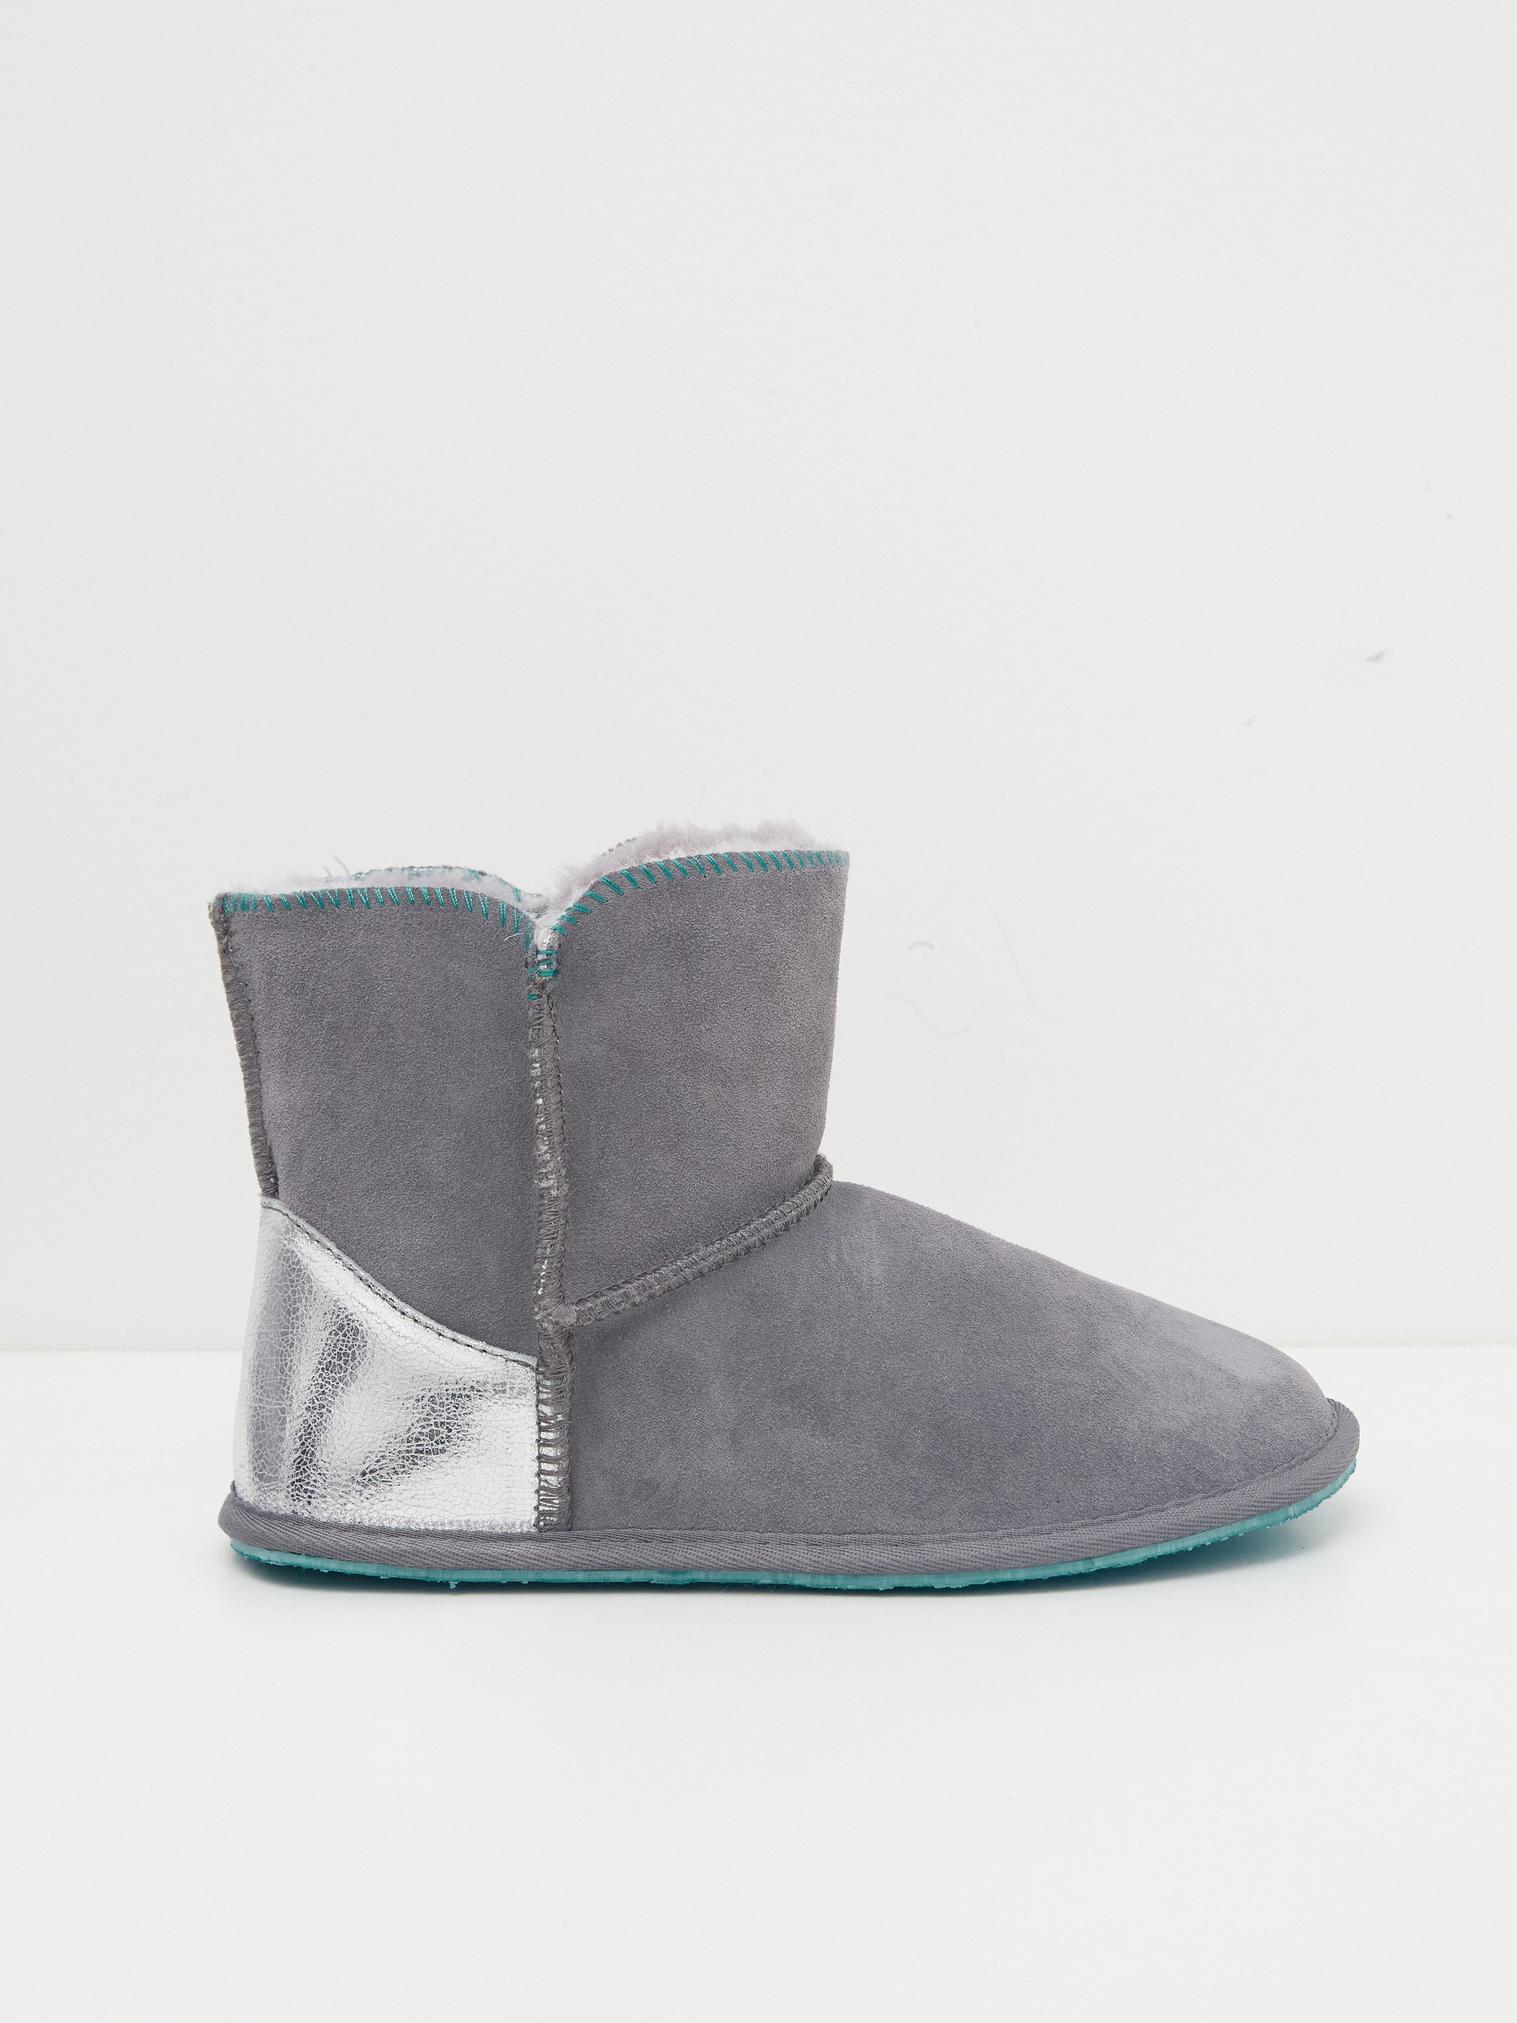 Suede and Shearling Bootie in DK GREY - MODEL FRONT